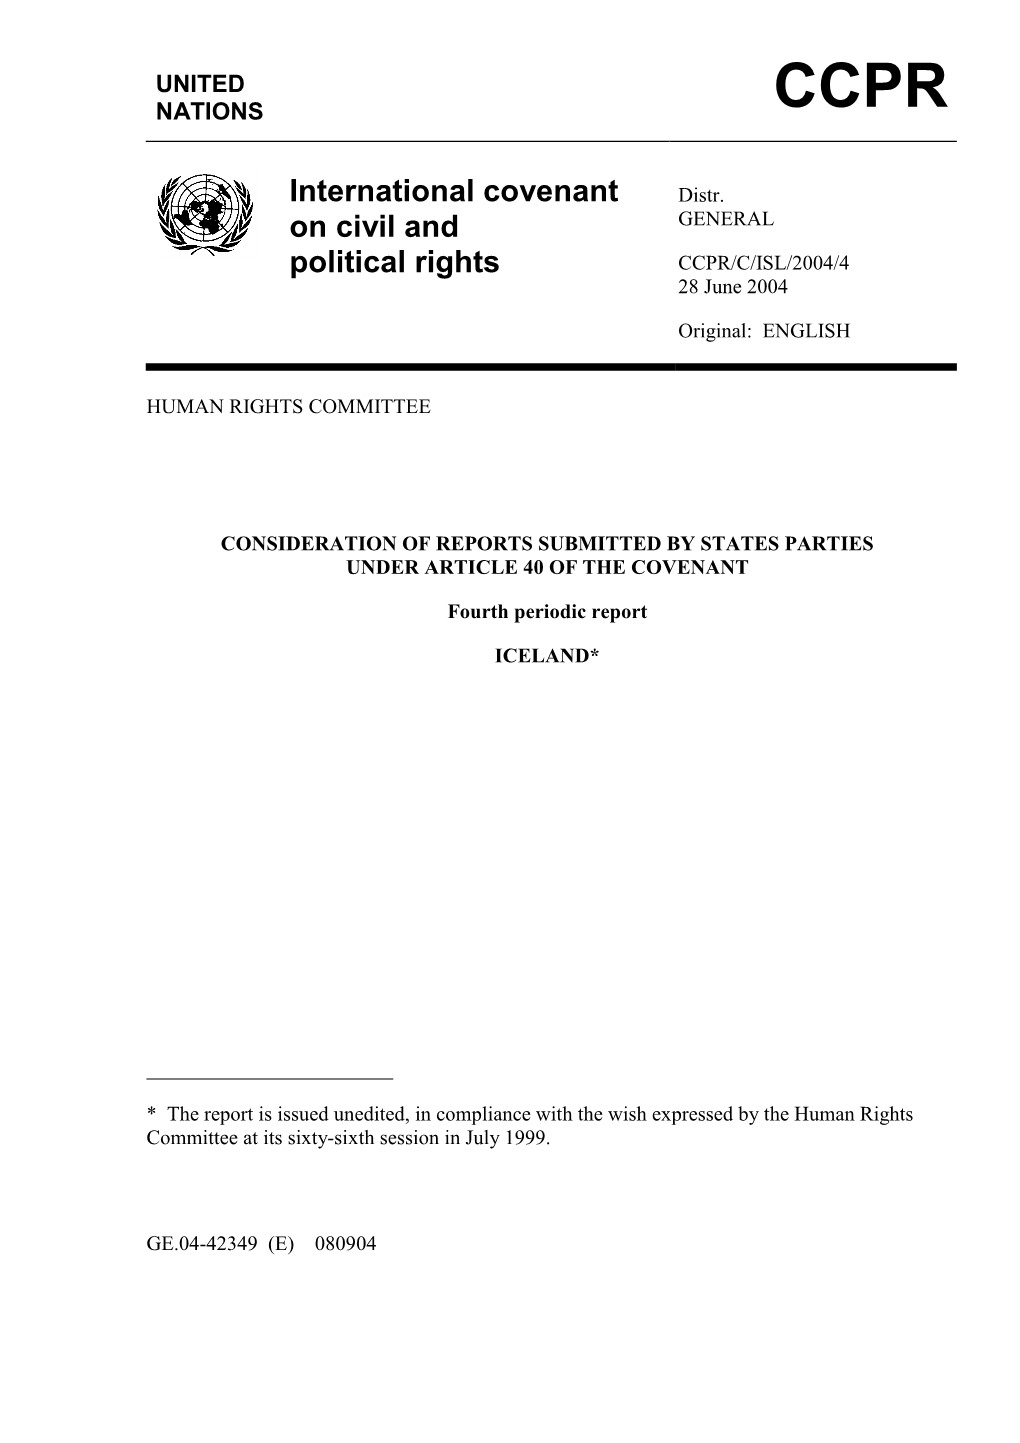 International Covenant on Civil and Political Rights [Hereinafter ICCPR] Is Presented